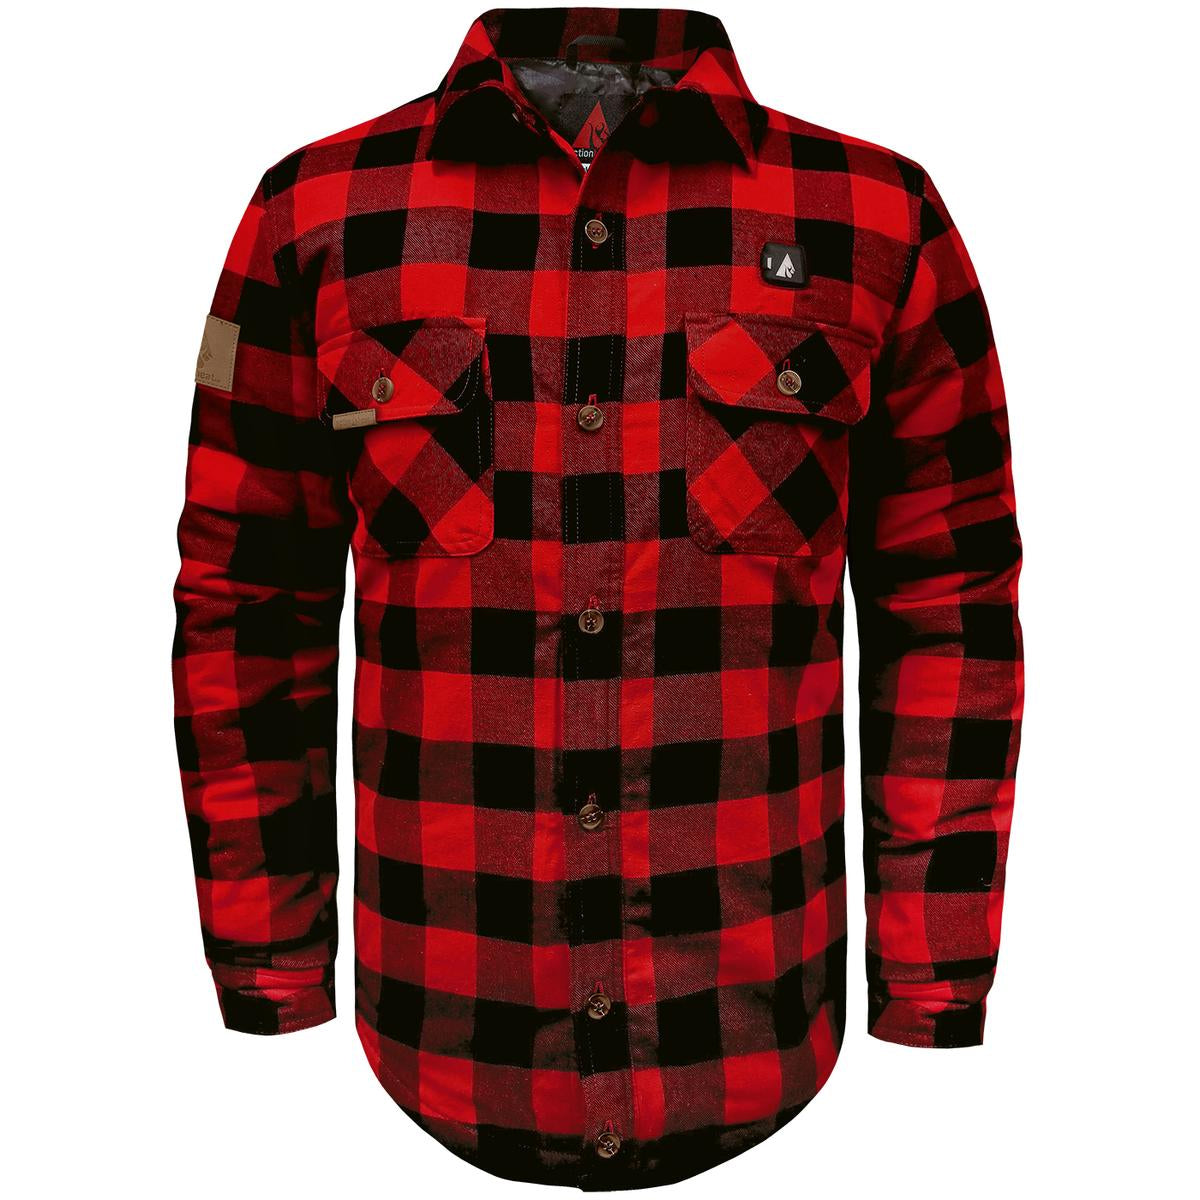 ActionHeat 5V Battery Heated Flannel Shirt - Heated